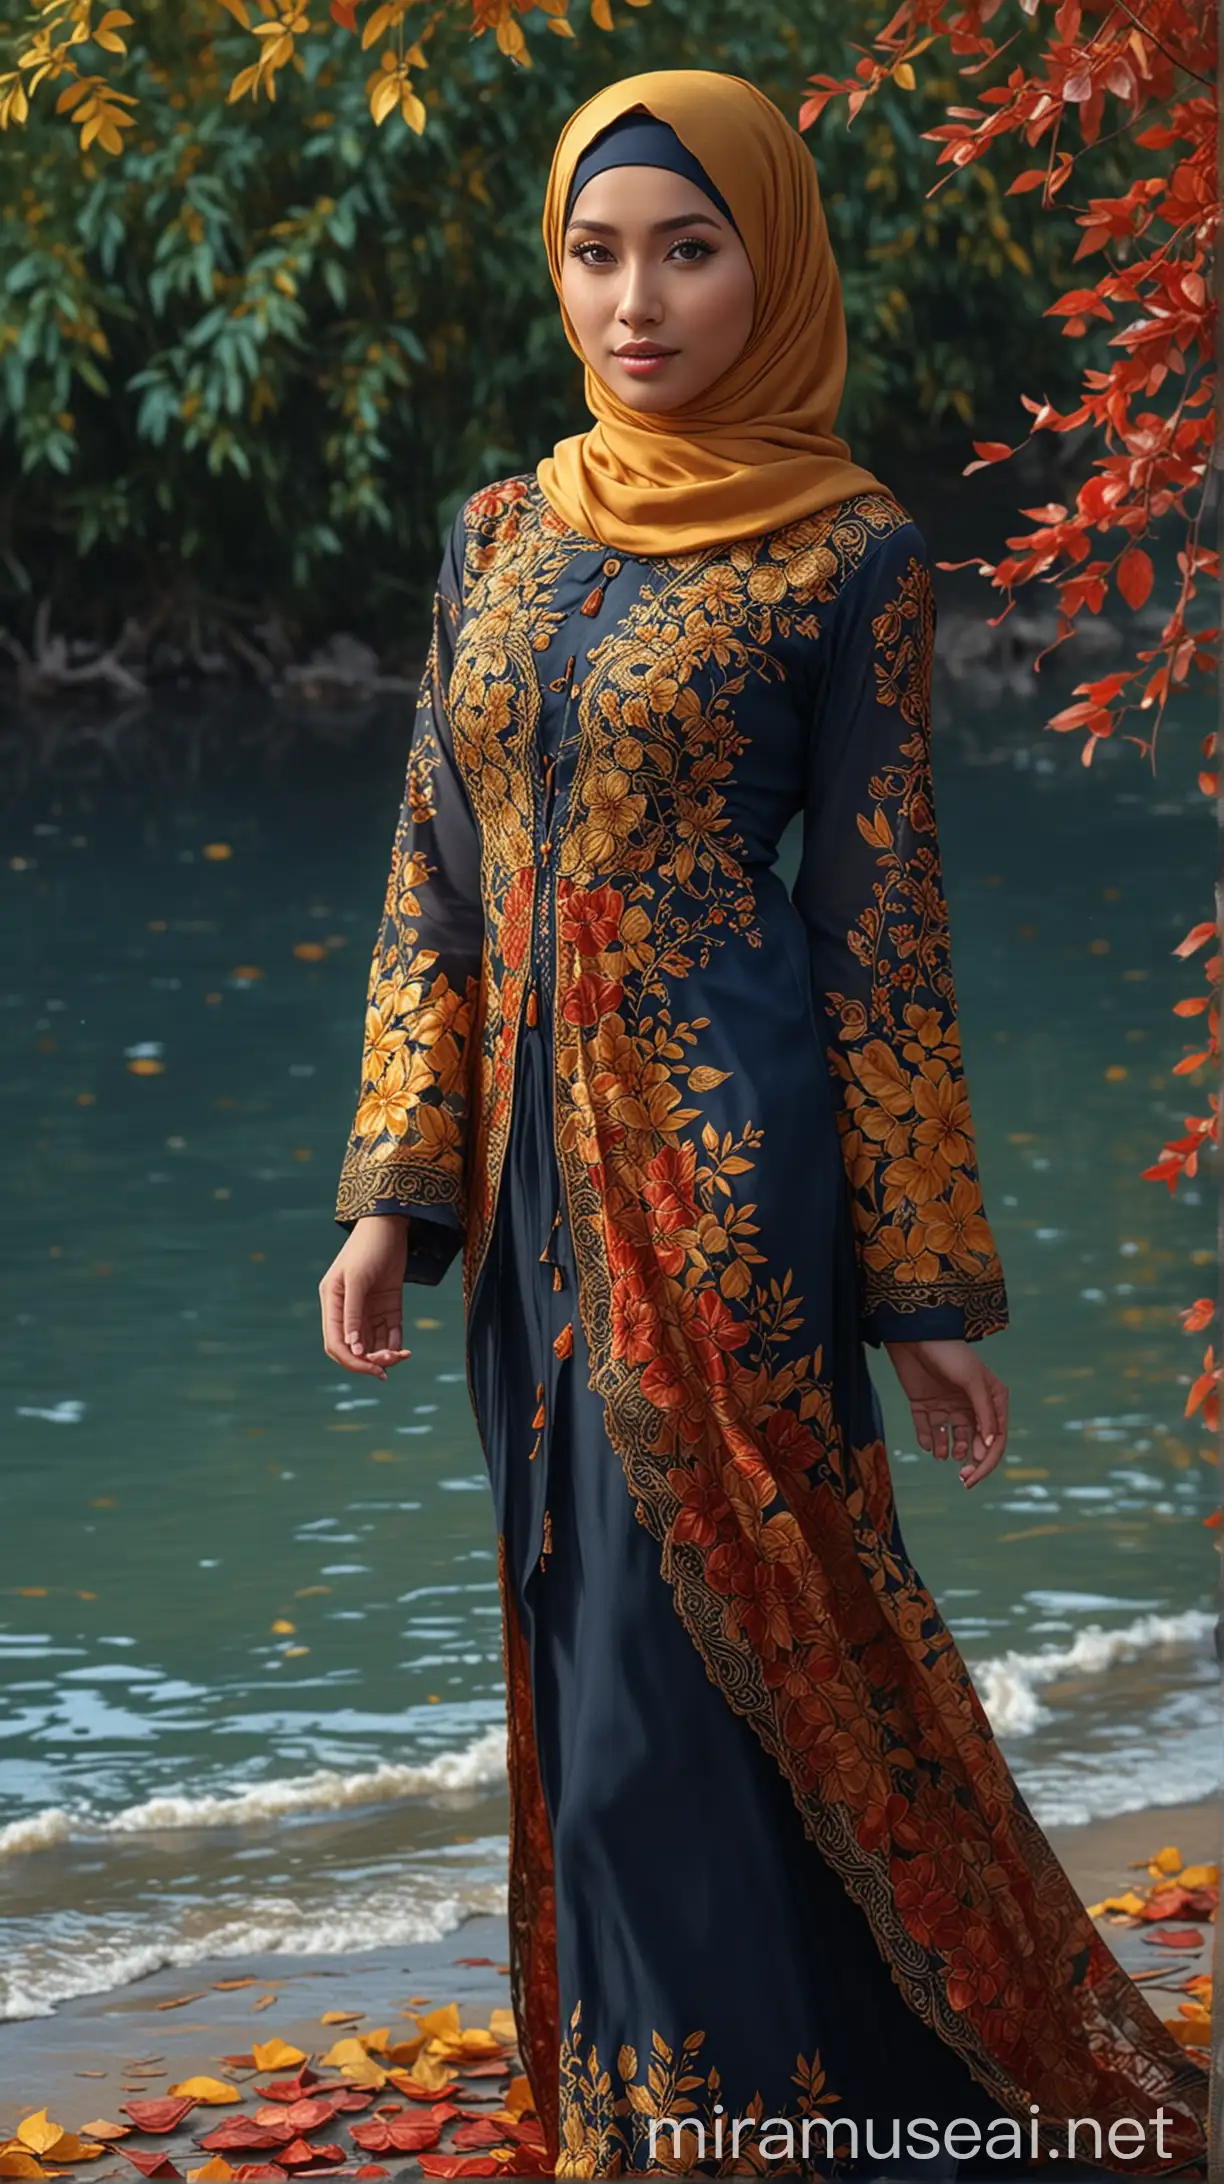 WITH BACK GROUND FULL OF  SPRING LEAF WITH CHROME YELLOW AND RED LEAVES professional photography it with soft lights during the evening), highly detailed, digital painting, art station, sharp focus, glowing eyes, wear fully hijab sea blue and  NAVY  loose kebaya, cover whole body, floral patten, wear heels, Enhance, dynamic shot
